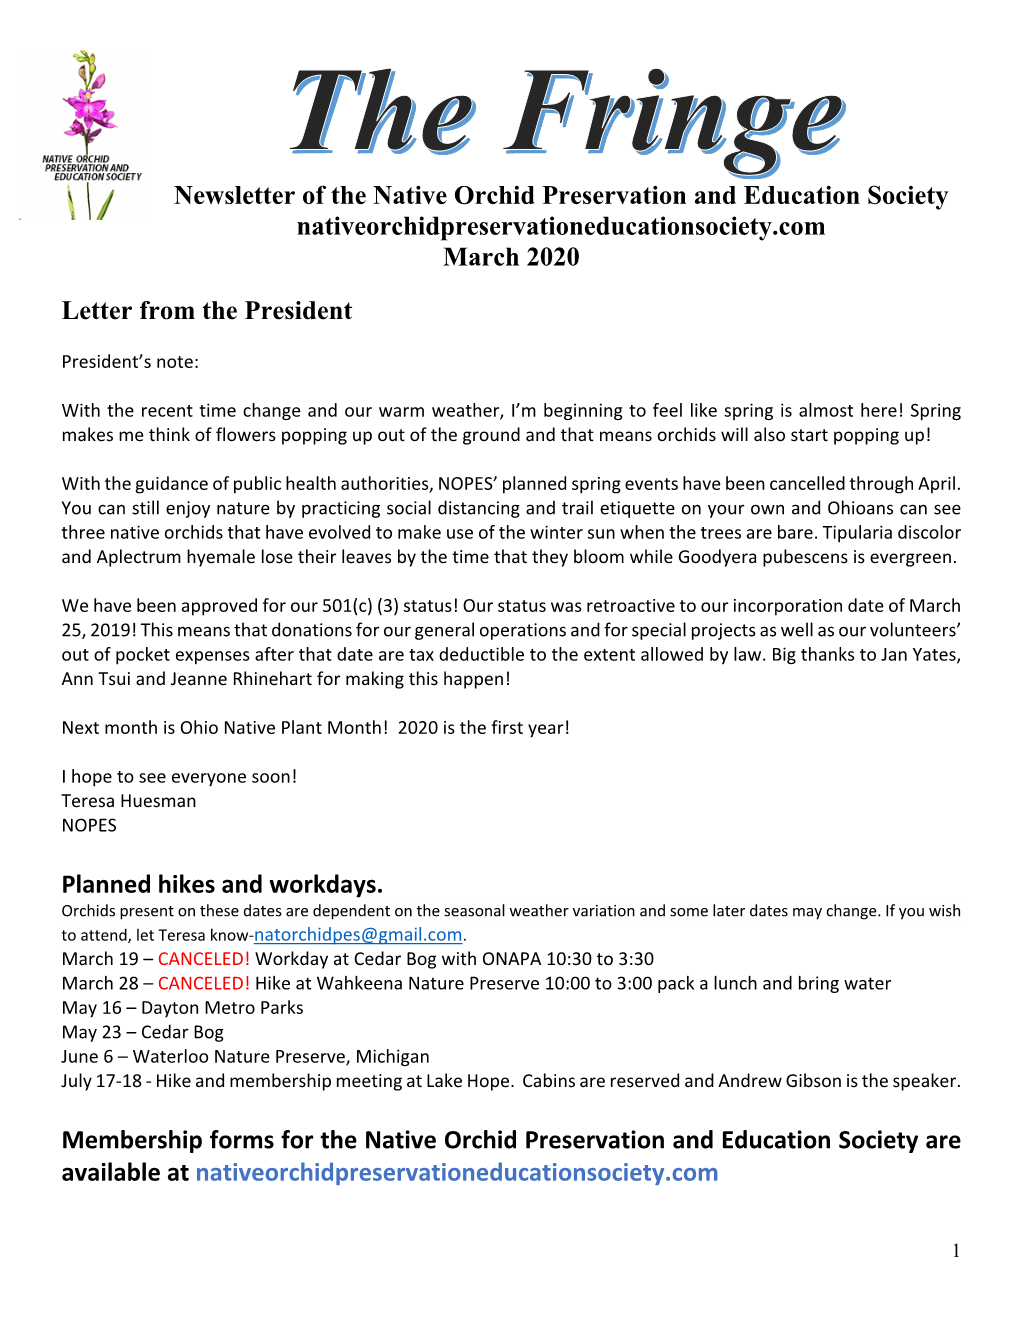 NOPES Newsletter 3 20Small